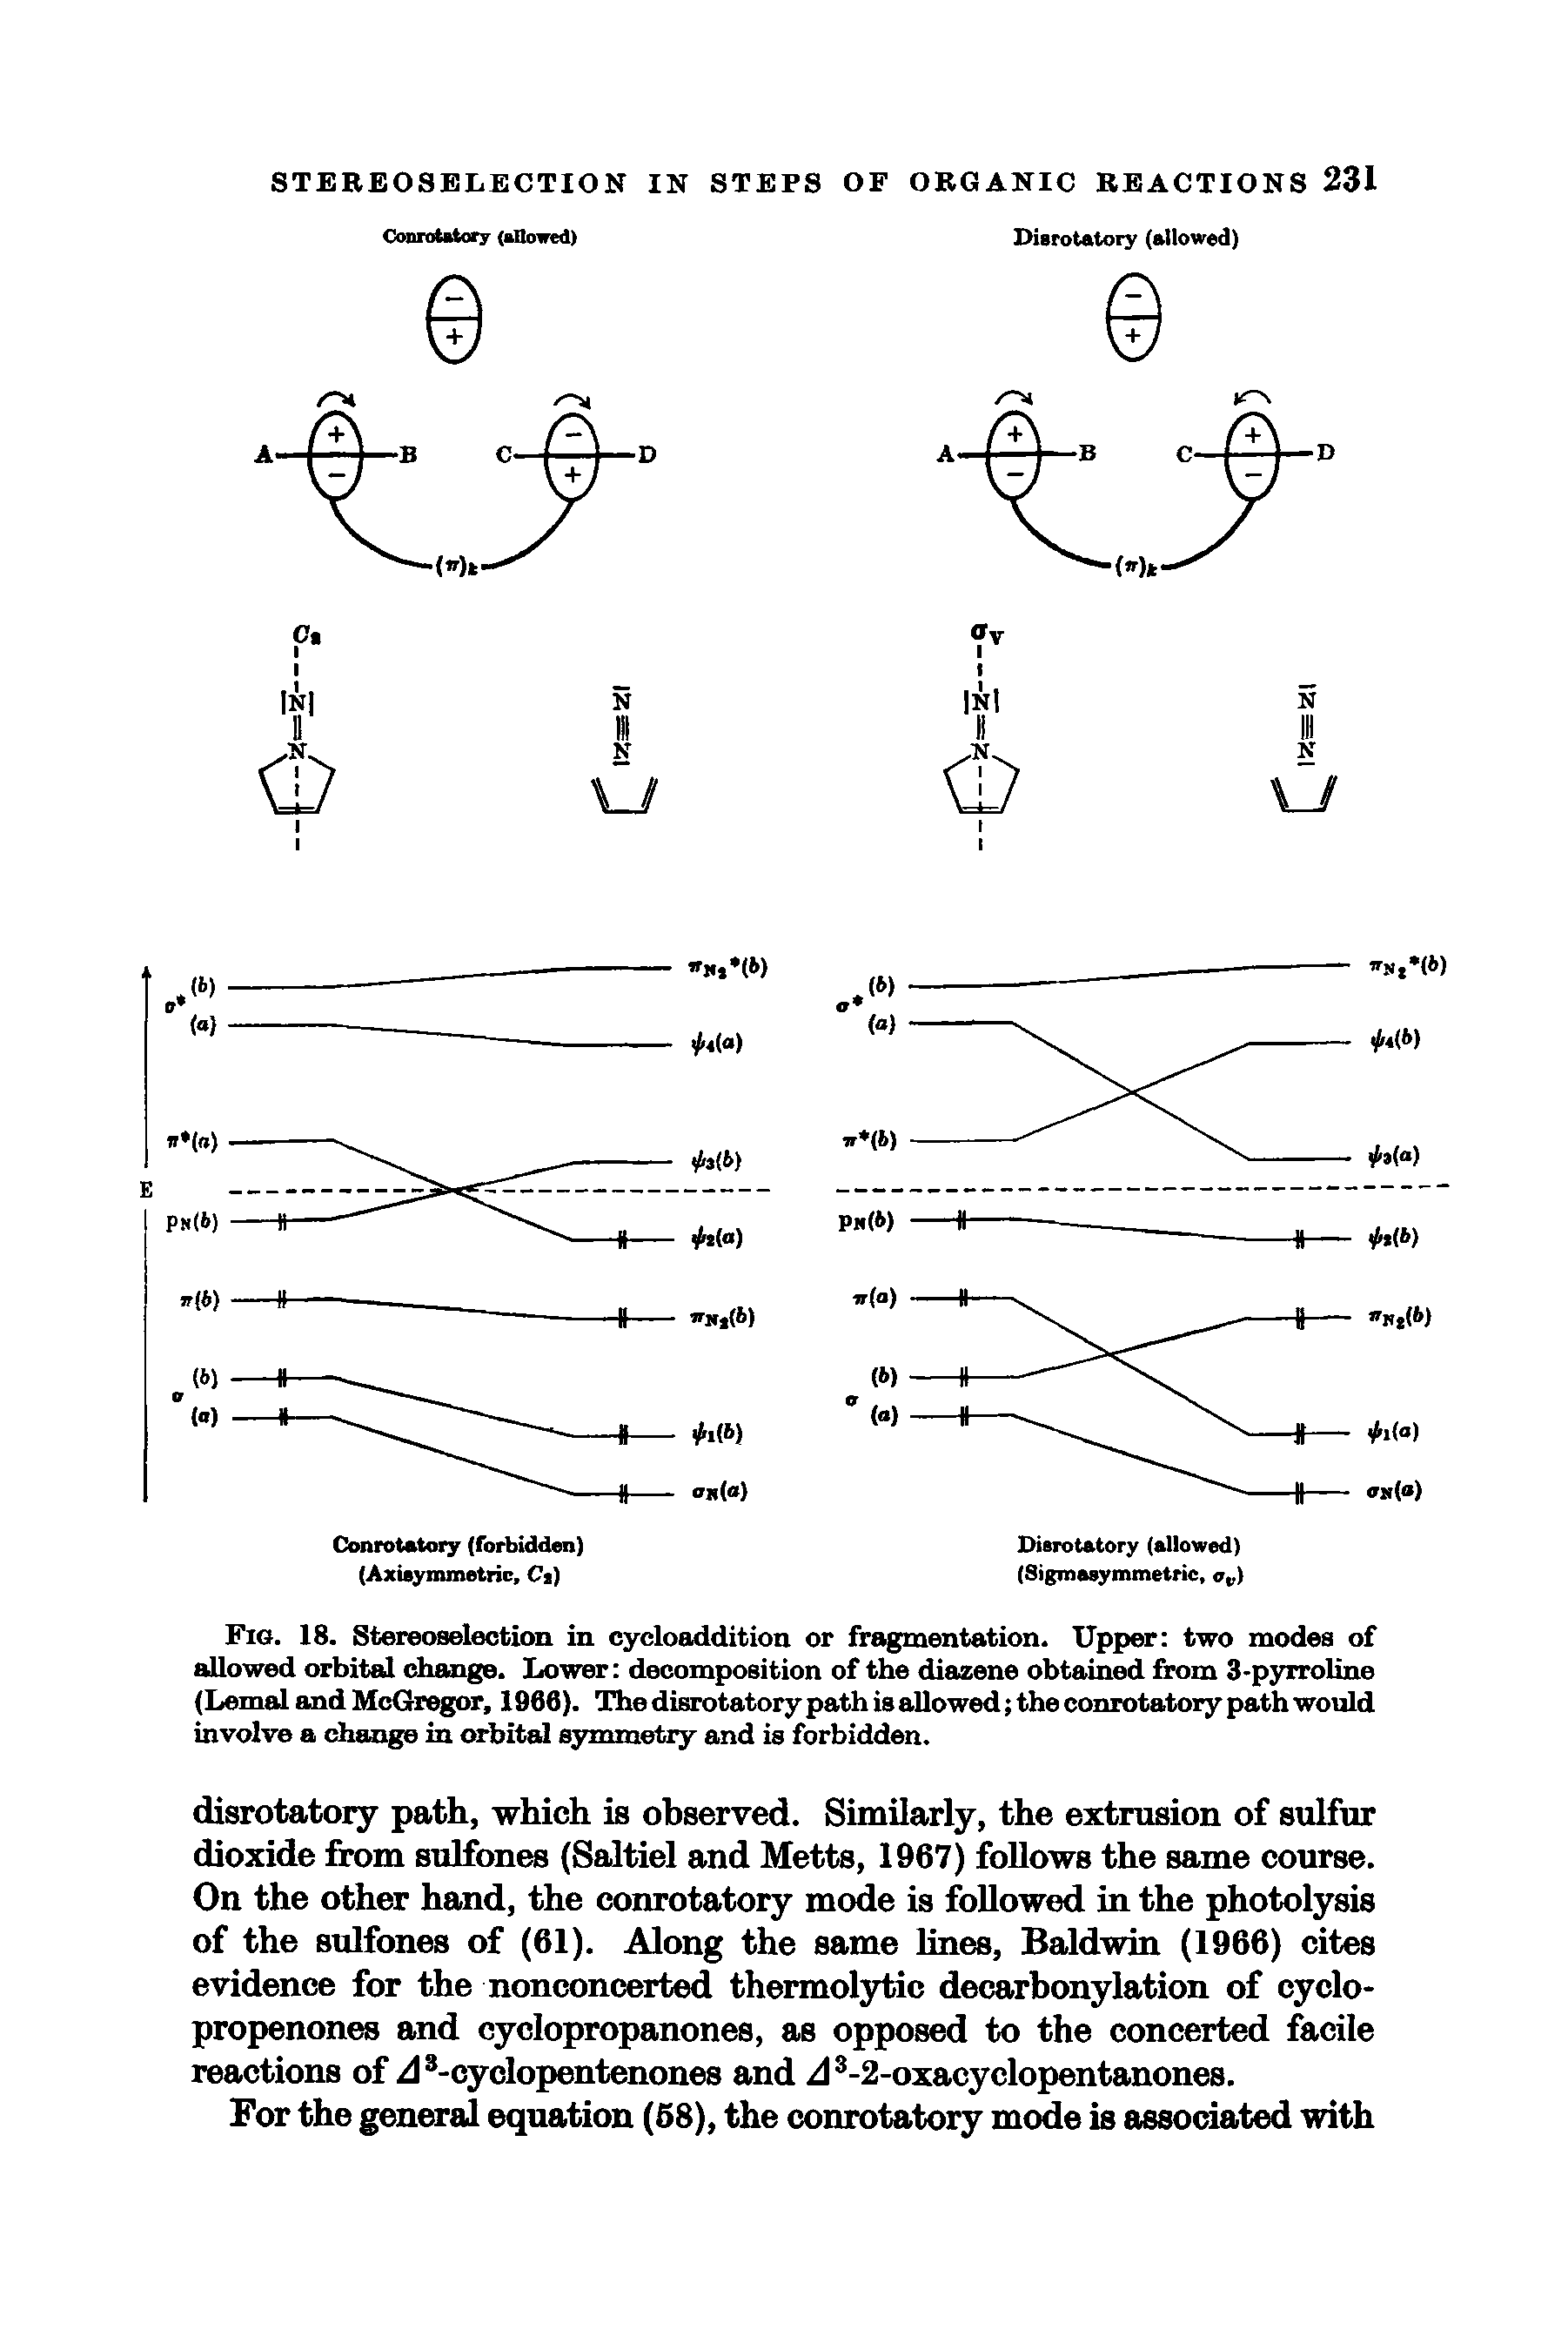 Fig. 18. Stereoselection in cycloaddition or fragmentation. Upper two modes of allowed orbital change. Lower decomposition of the diazene obtained from 3-pyrroline (Lemal and McGregor, 1966). The disrotatory path is allowed the conrotatory path would involve a change in orbital symmetry and is forbidden.